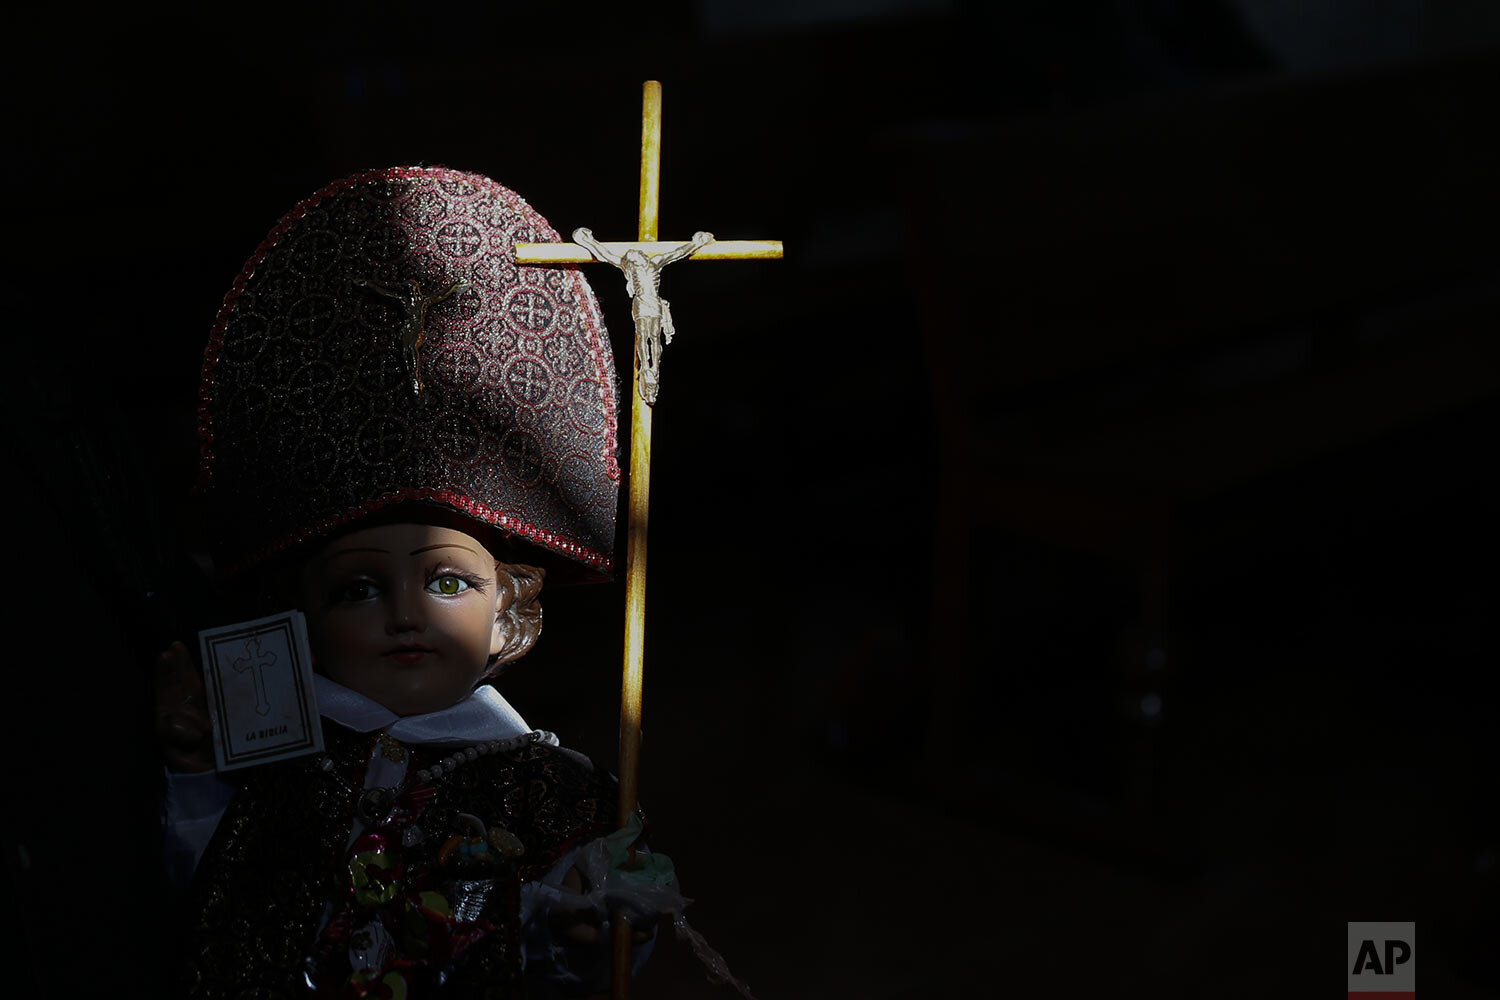  A sunbeam shines on the face of a Baby Jesus figurine held by a man waiting to get it blessed at the Purification of Our Lady of Candlemas Chapel in Mexico City, Feb. 2, 2021. (AP Photo/Rebecca Blackwell) 